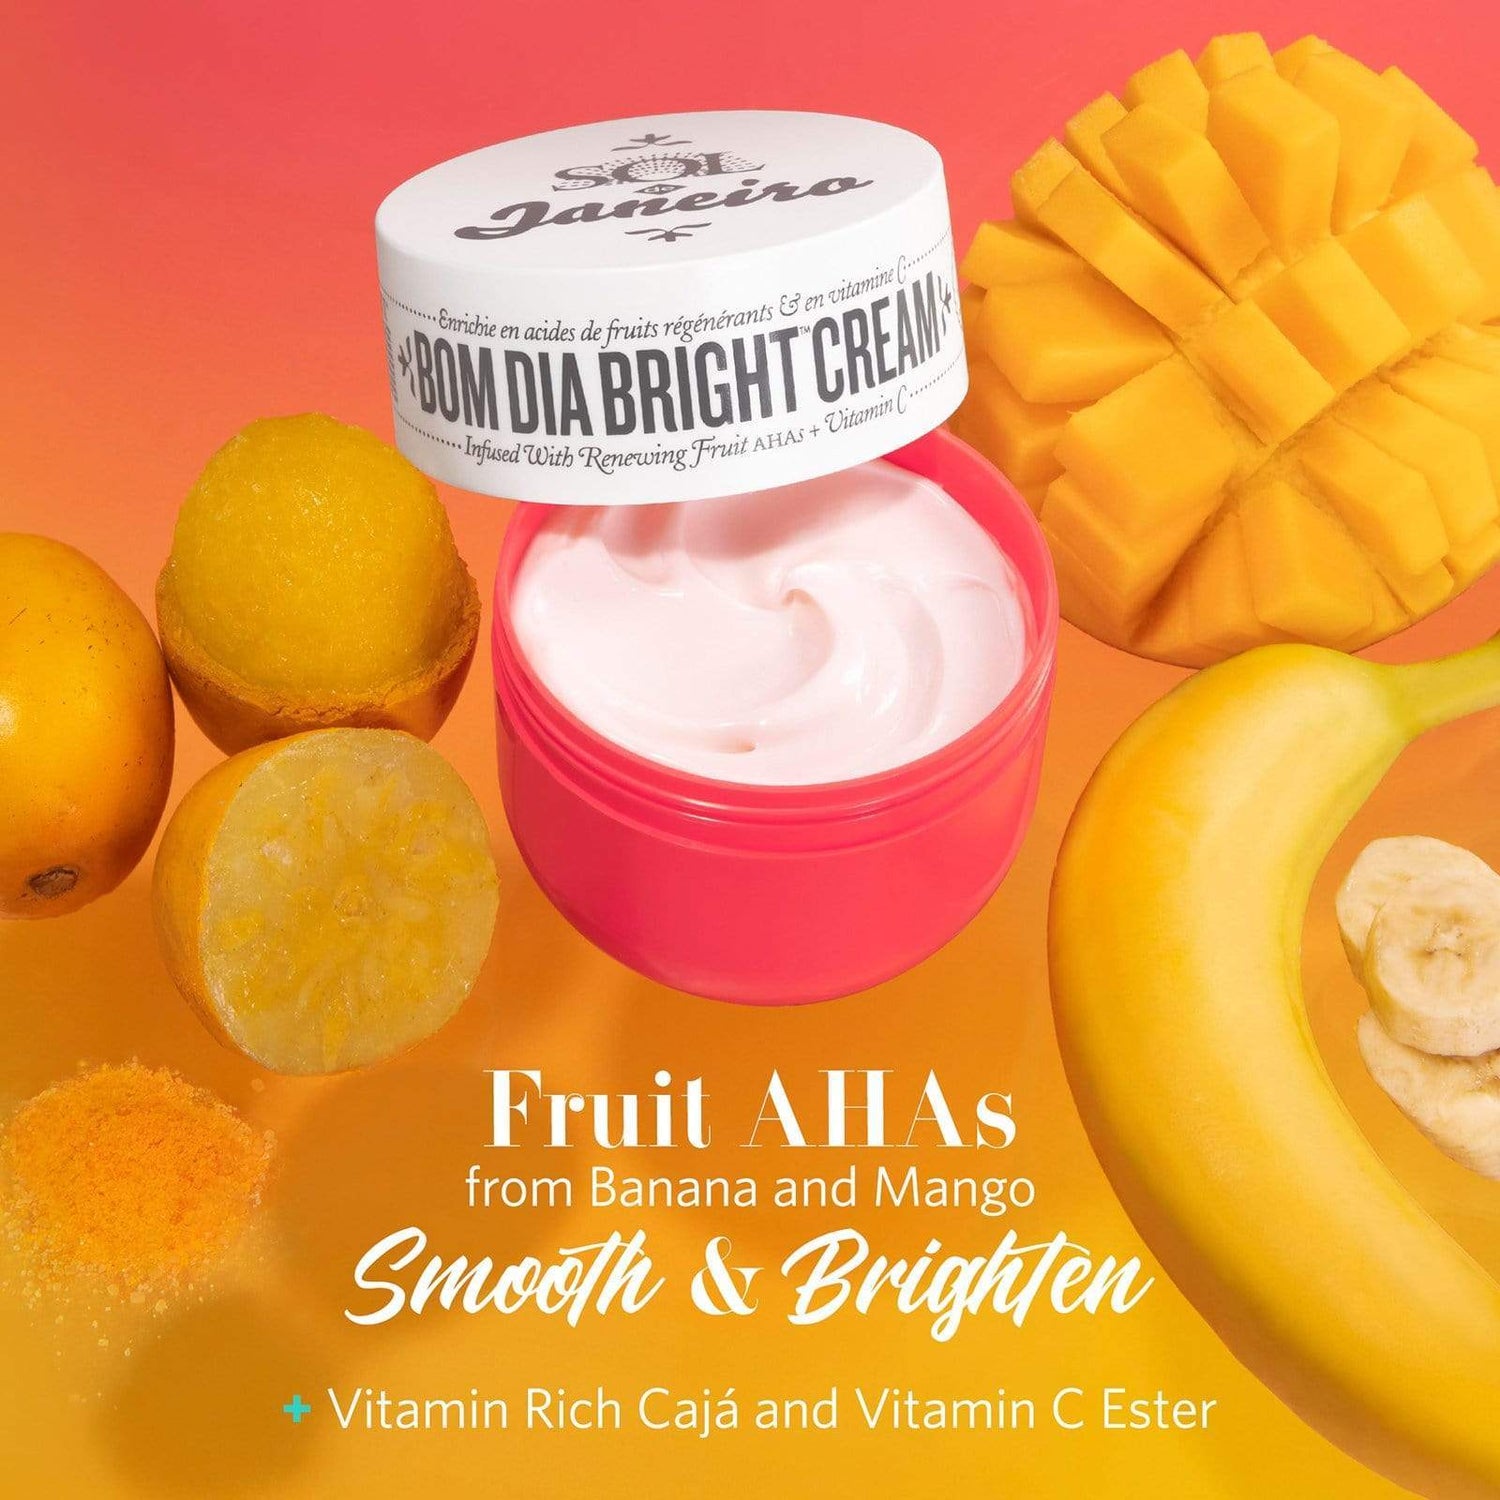 Benefits all over - Fruit AHAs from Banana and Mango smooth plus Vitamin C Ester visibly brightens